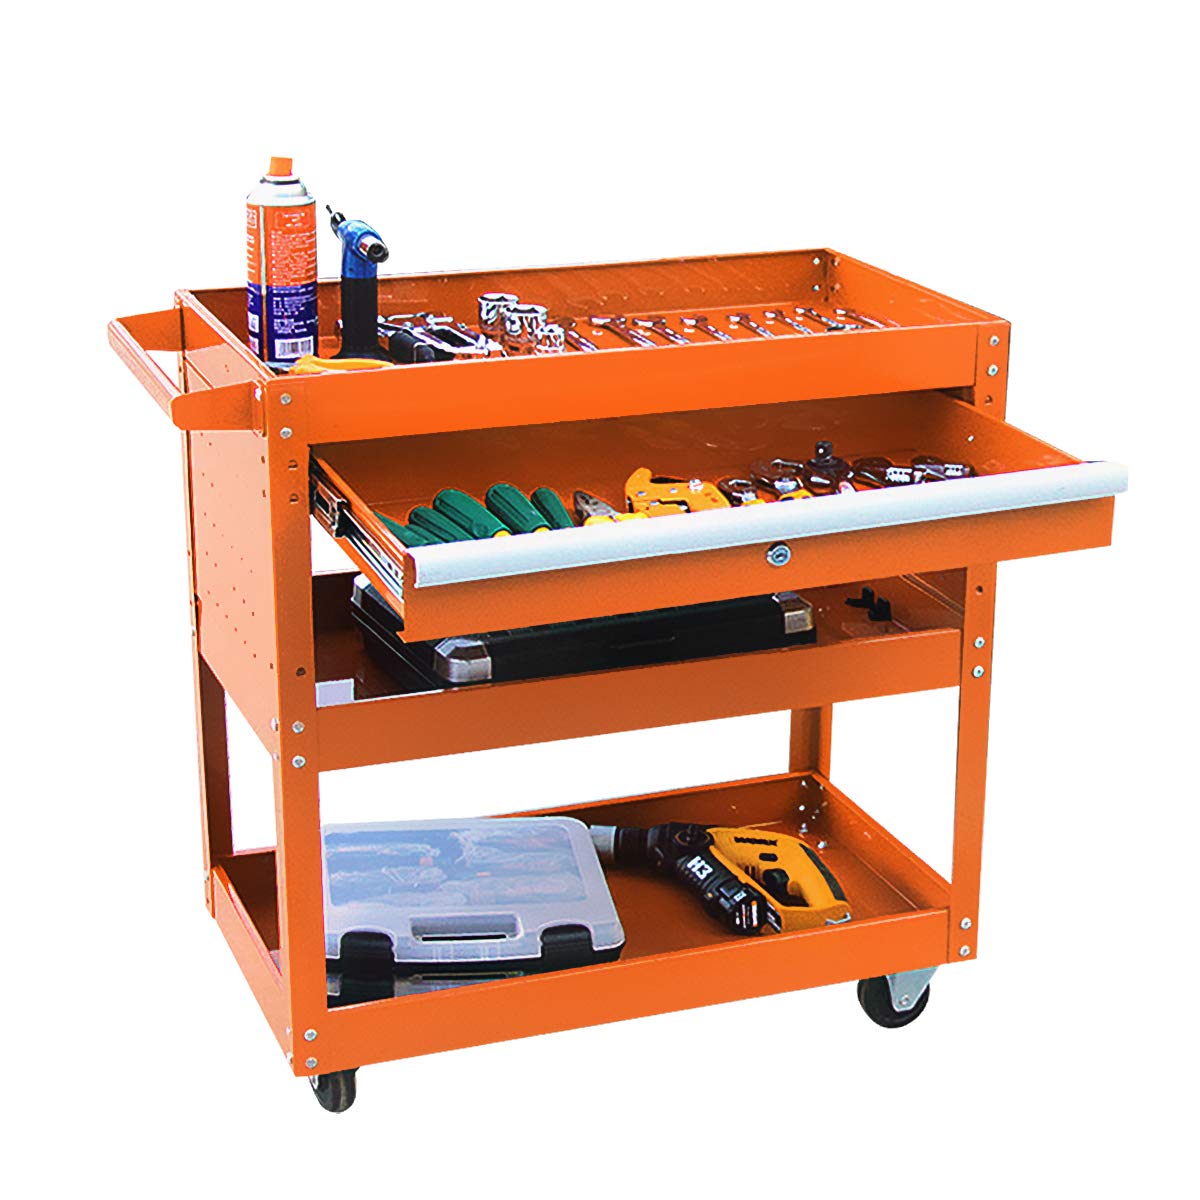 3 Tier Utility Rolling Tool Cart 330 Lbs Capacity Tool Cart with Drawer and Lock, Industrial Service Tool Cart on Wheels for Mechanics, Mobile Tool...